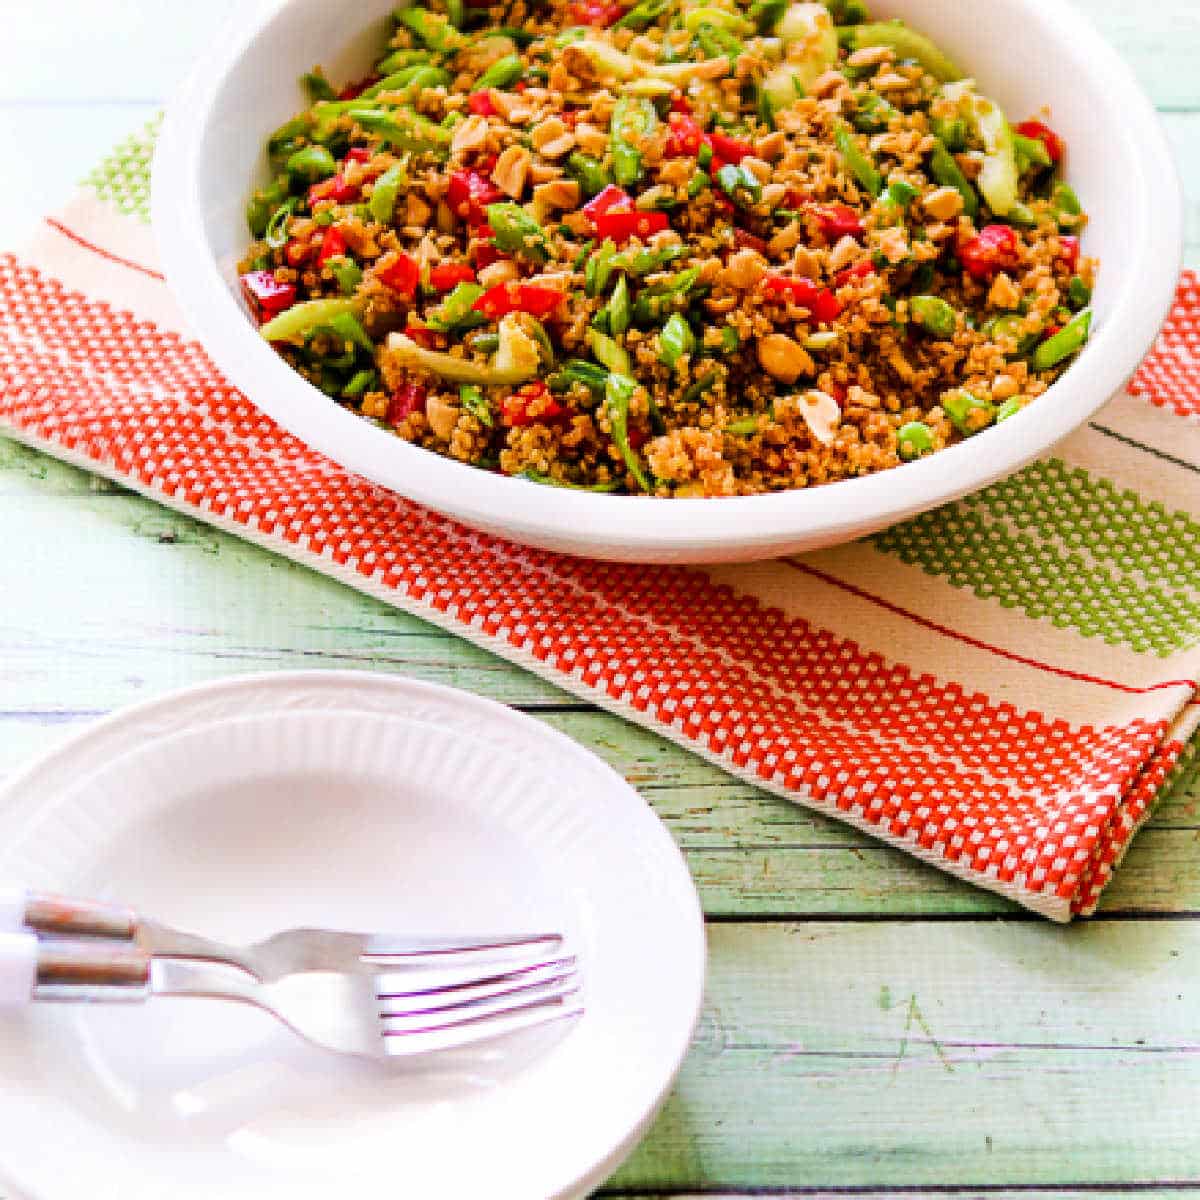 Square image for Asian Quinoa Salad shown in serving bowl with napkin, bowls, and plates.